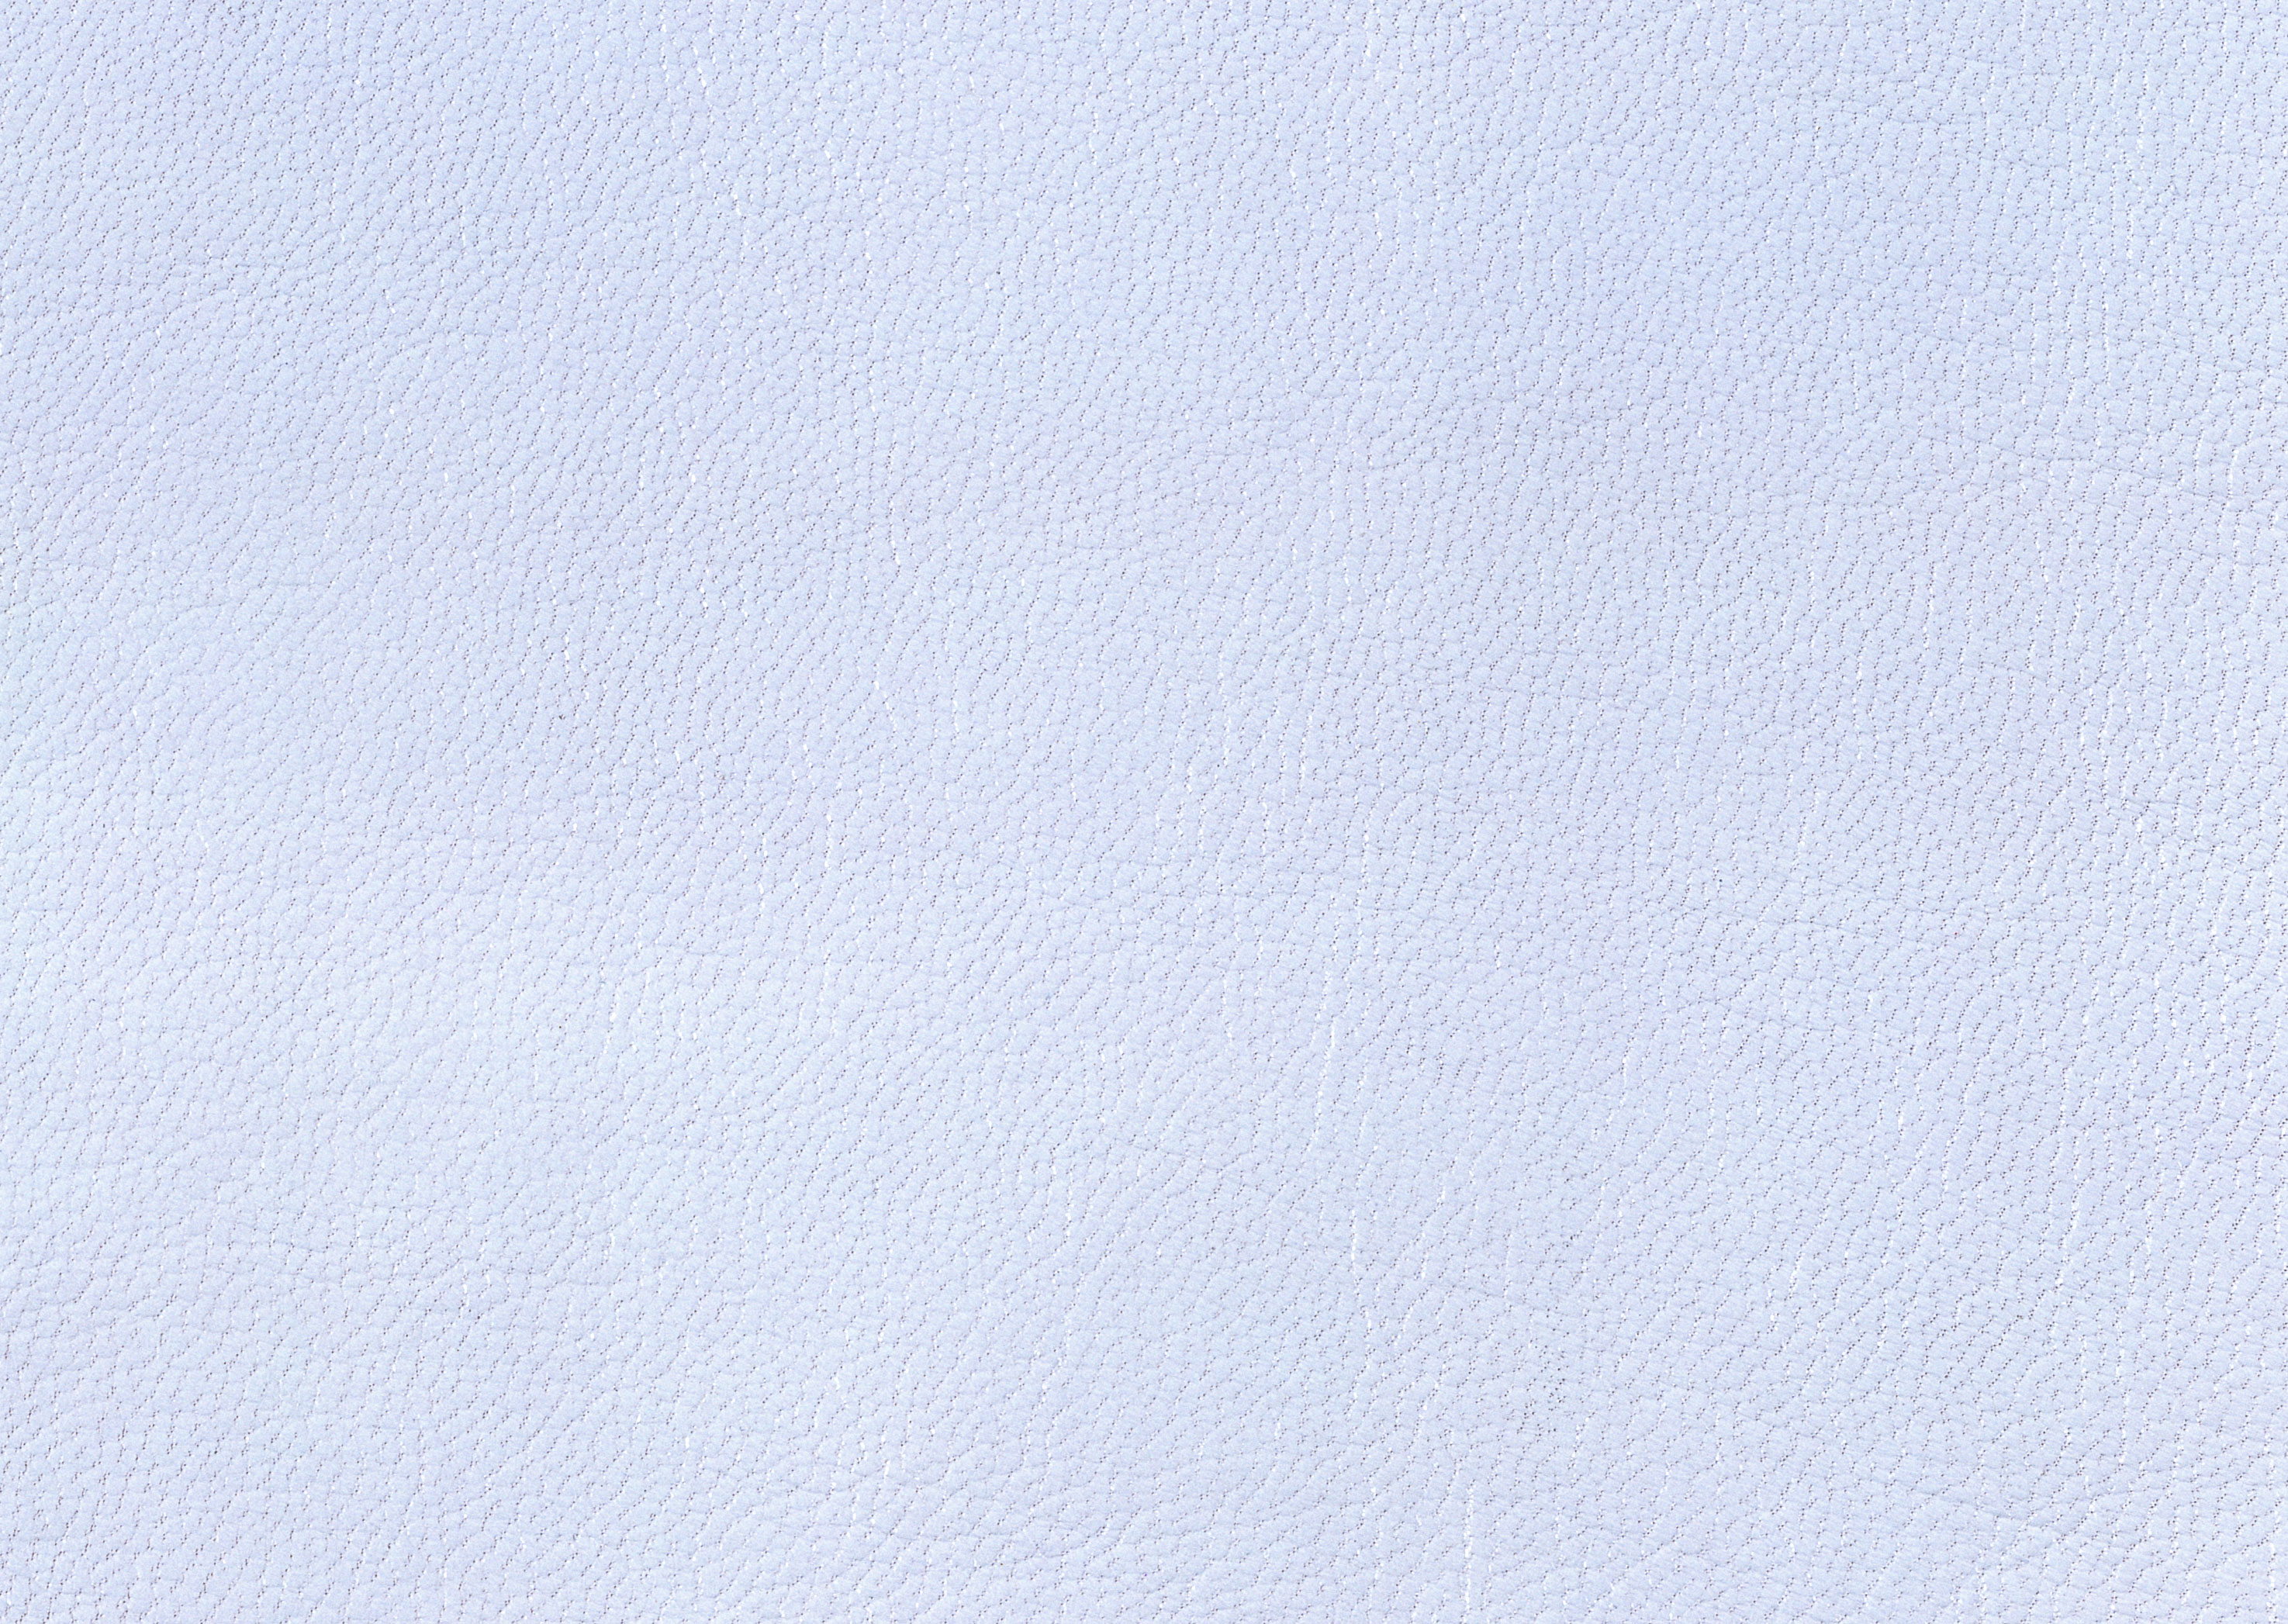 White leather texture background image free download